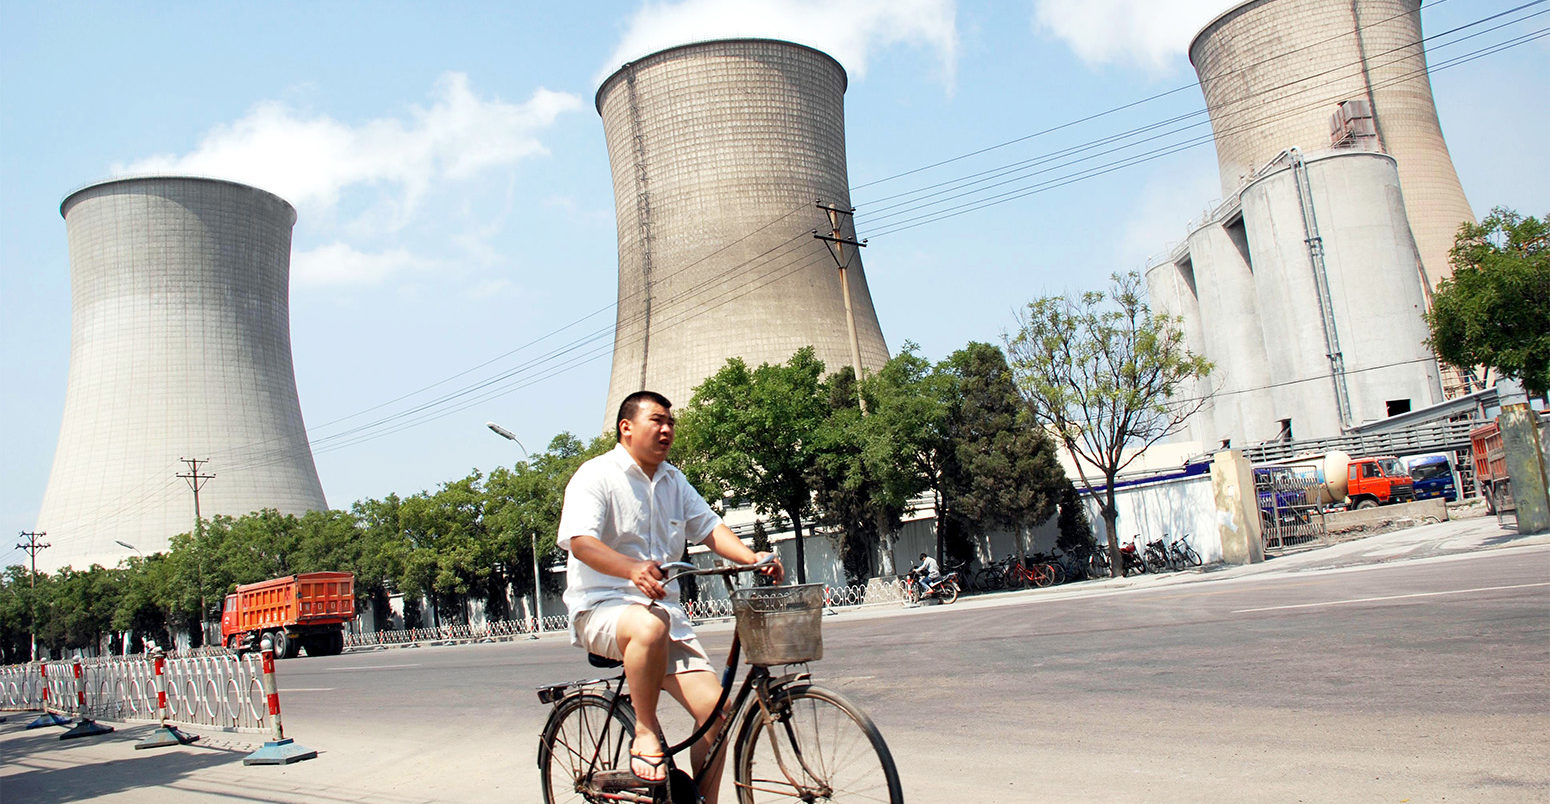 A cyclist rides past a coal-fired power plant in Beijing, China. Credit: Imaginechina Limited / Alamy Stock Photo. W9CEBT